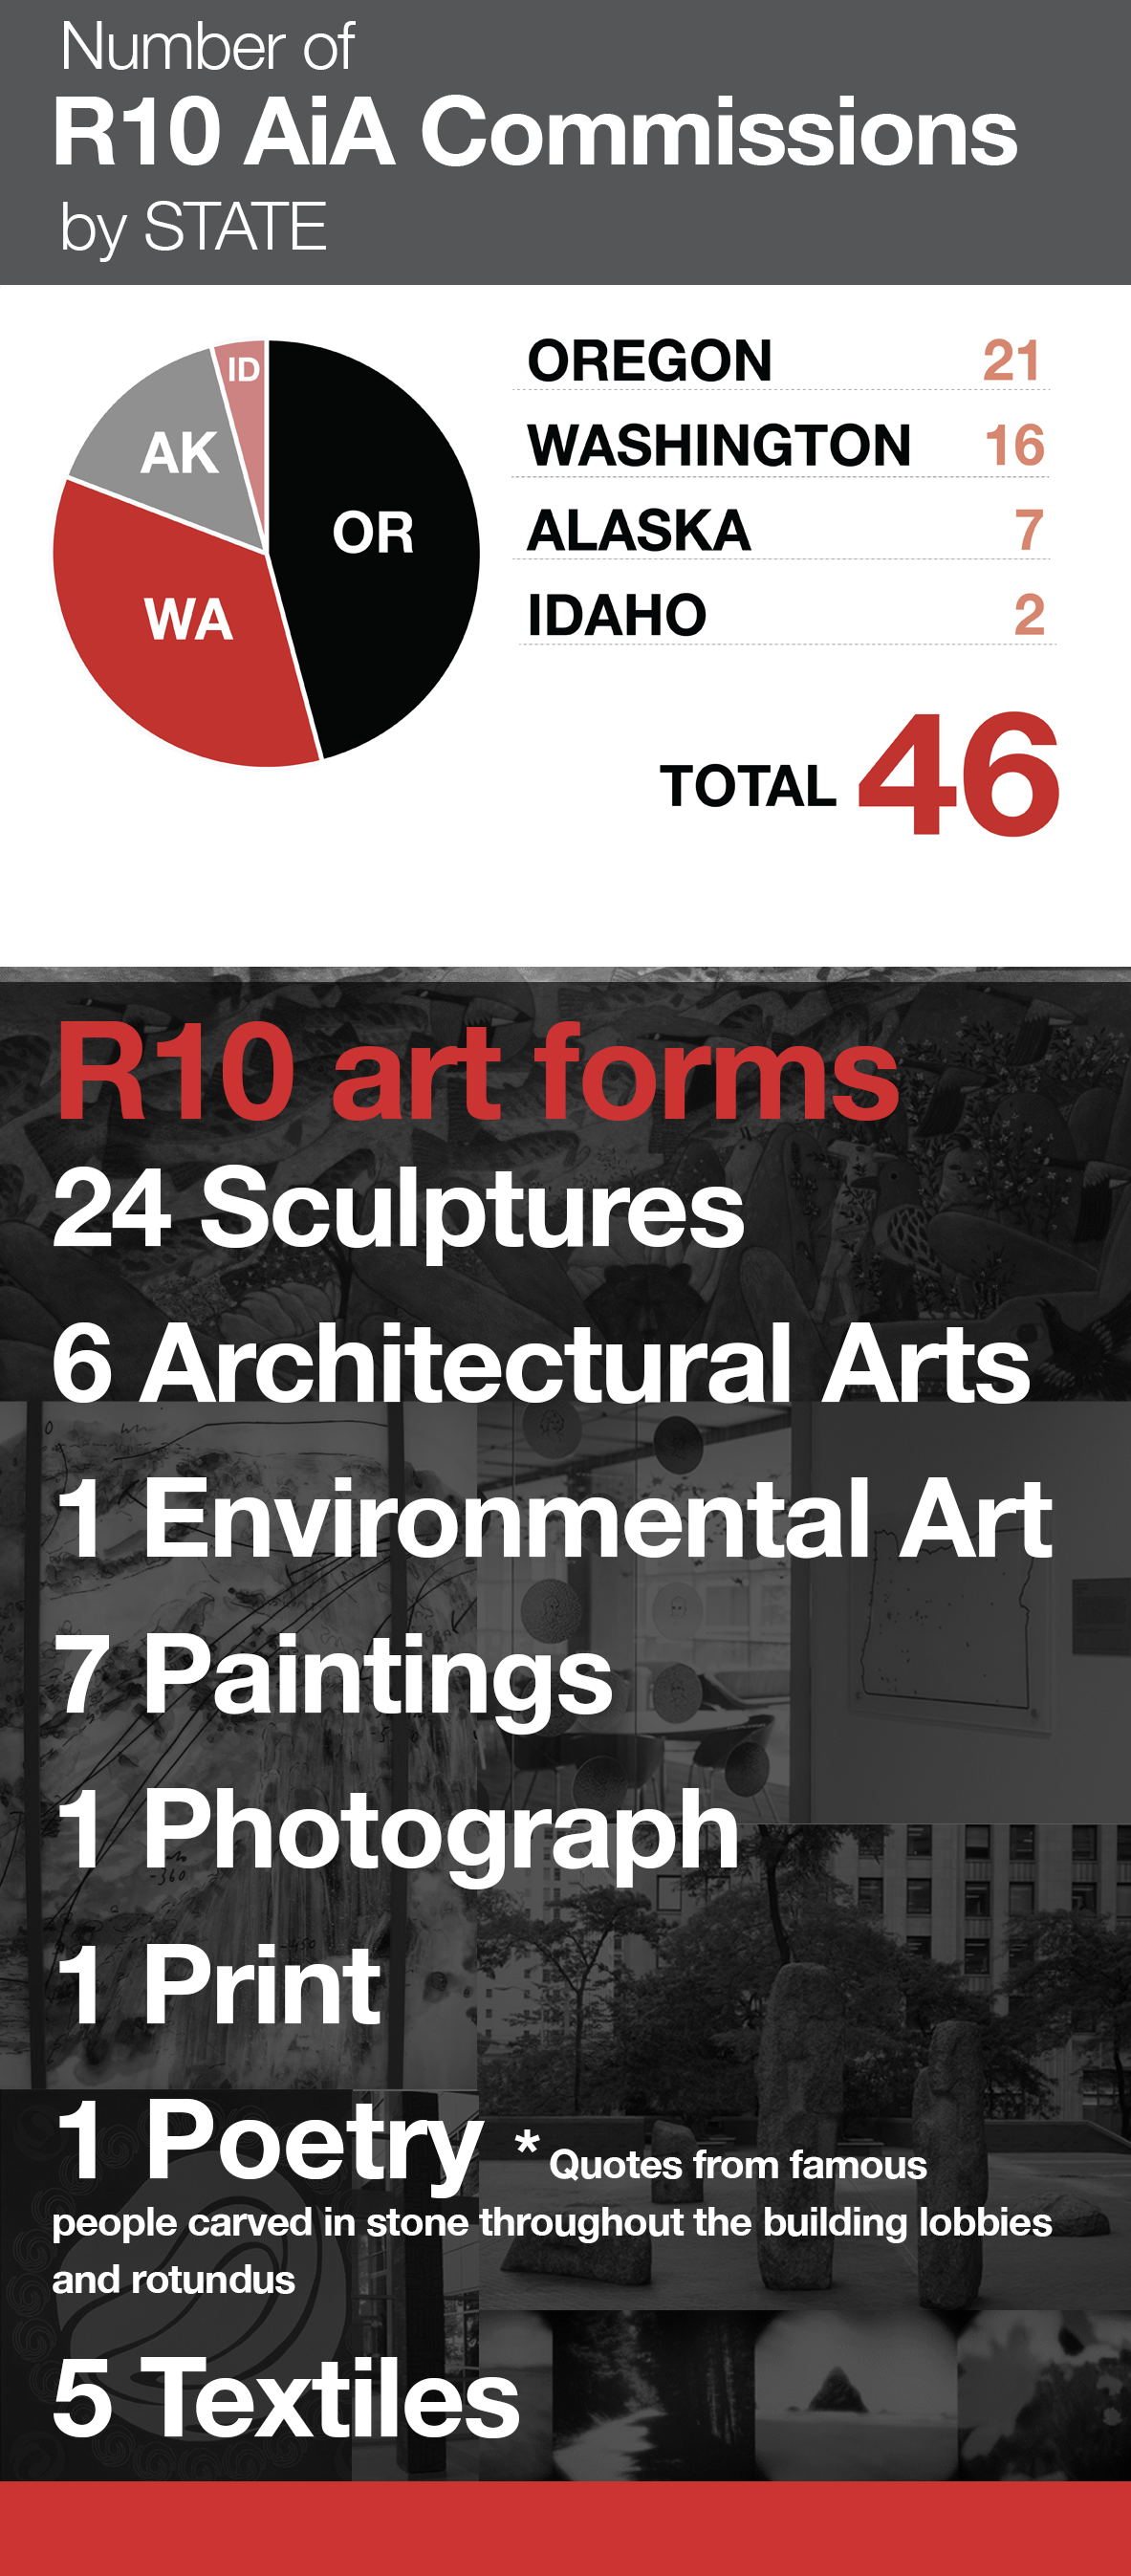 There are currently 46 AiA artworks installed in buildings across Region 10. R10 art forms: 24 Sculptures 6 Architectural Arts 